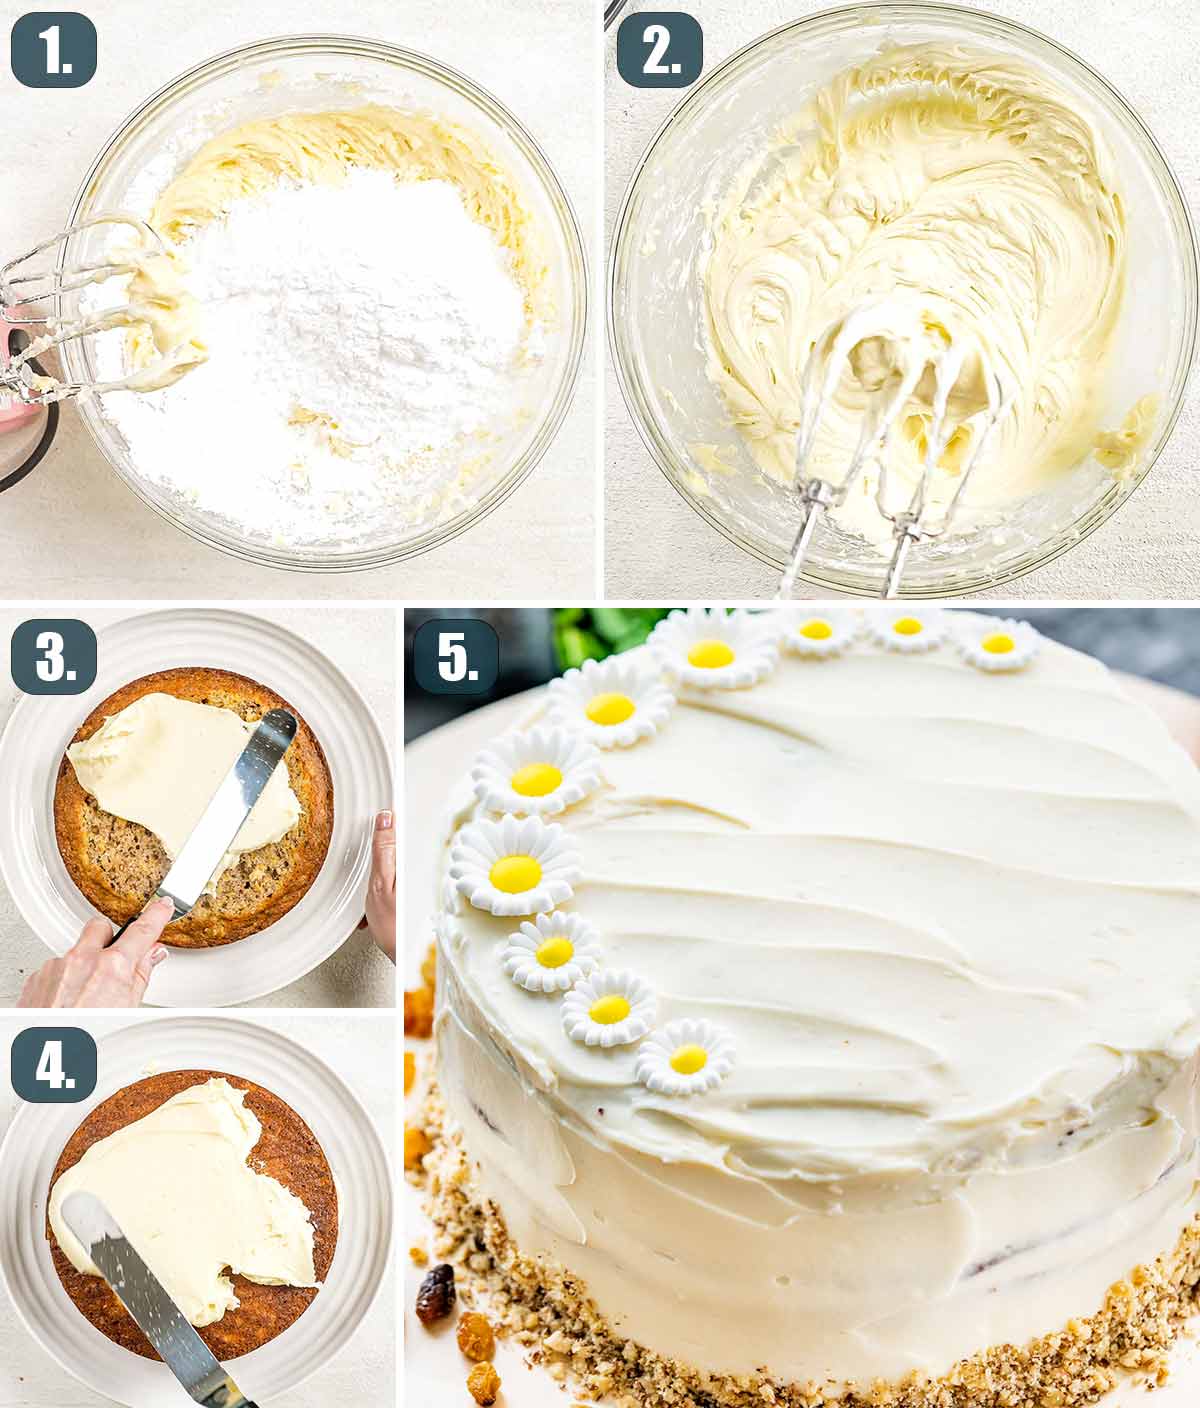 process shots showing how to make cream cheese frosting and how to ice a carrot cake.